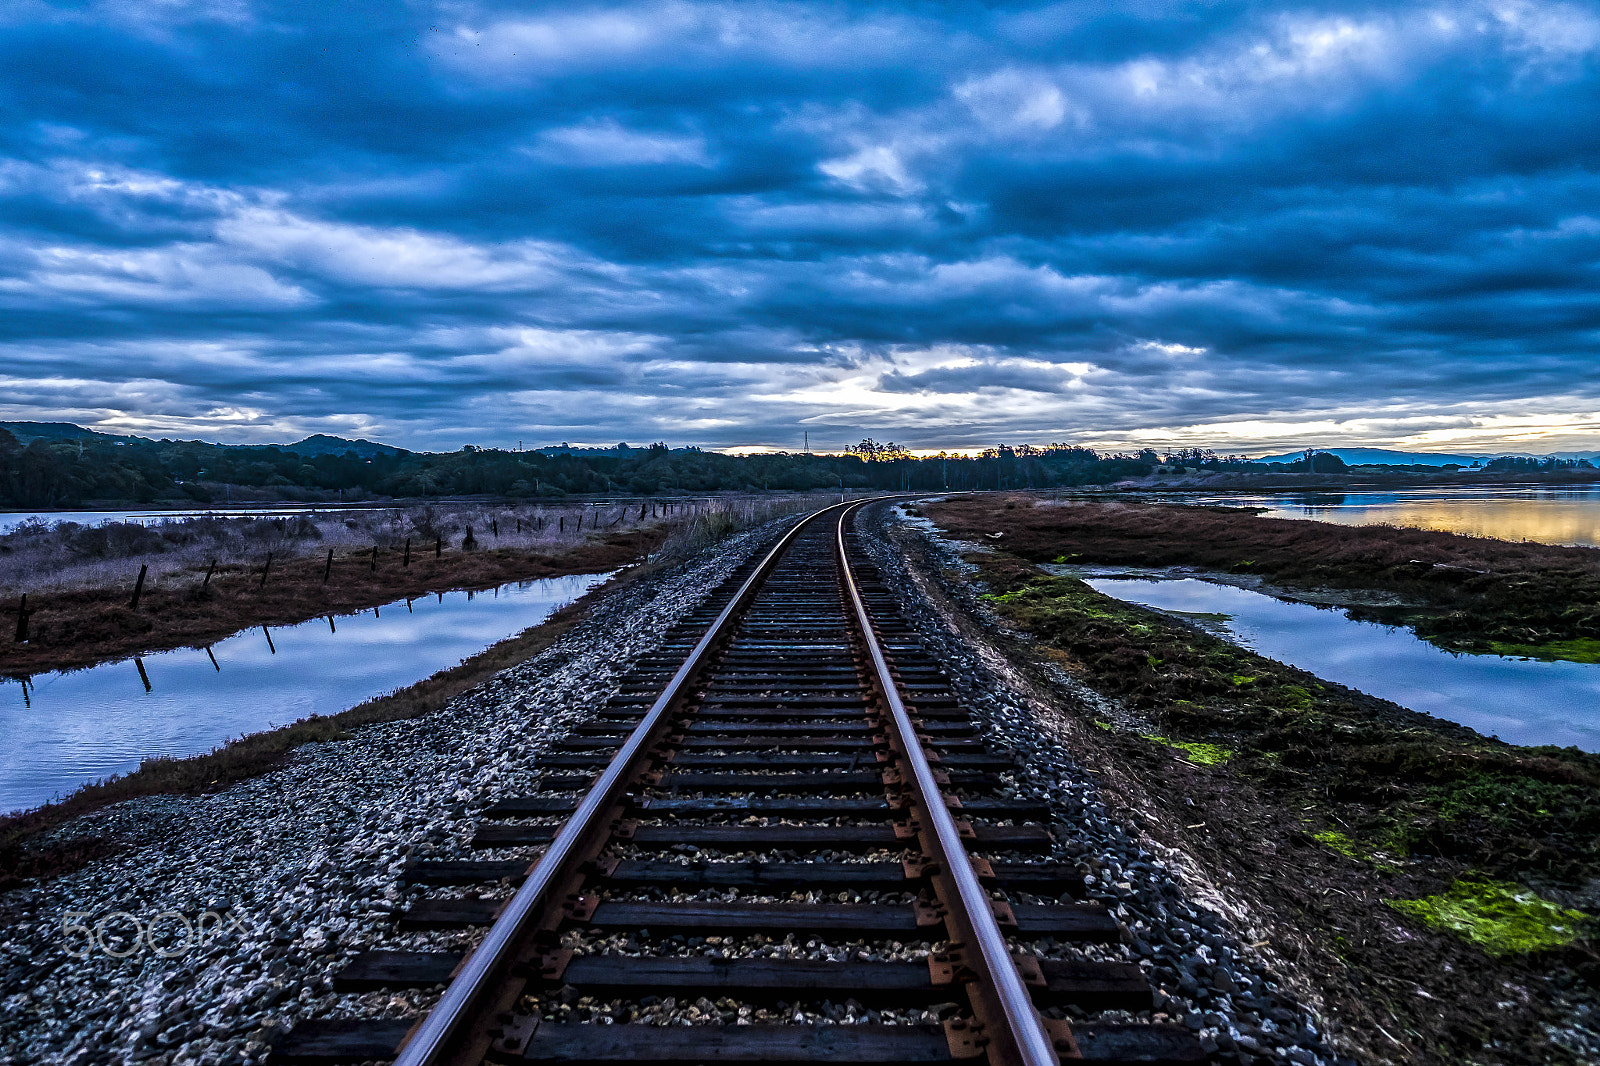 Fujifilm X-T1 sample photo. Down the tracks at elkhorn slough on a cloudy day photography